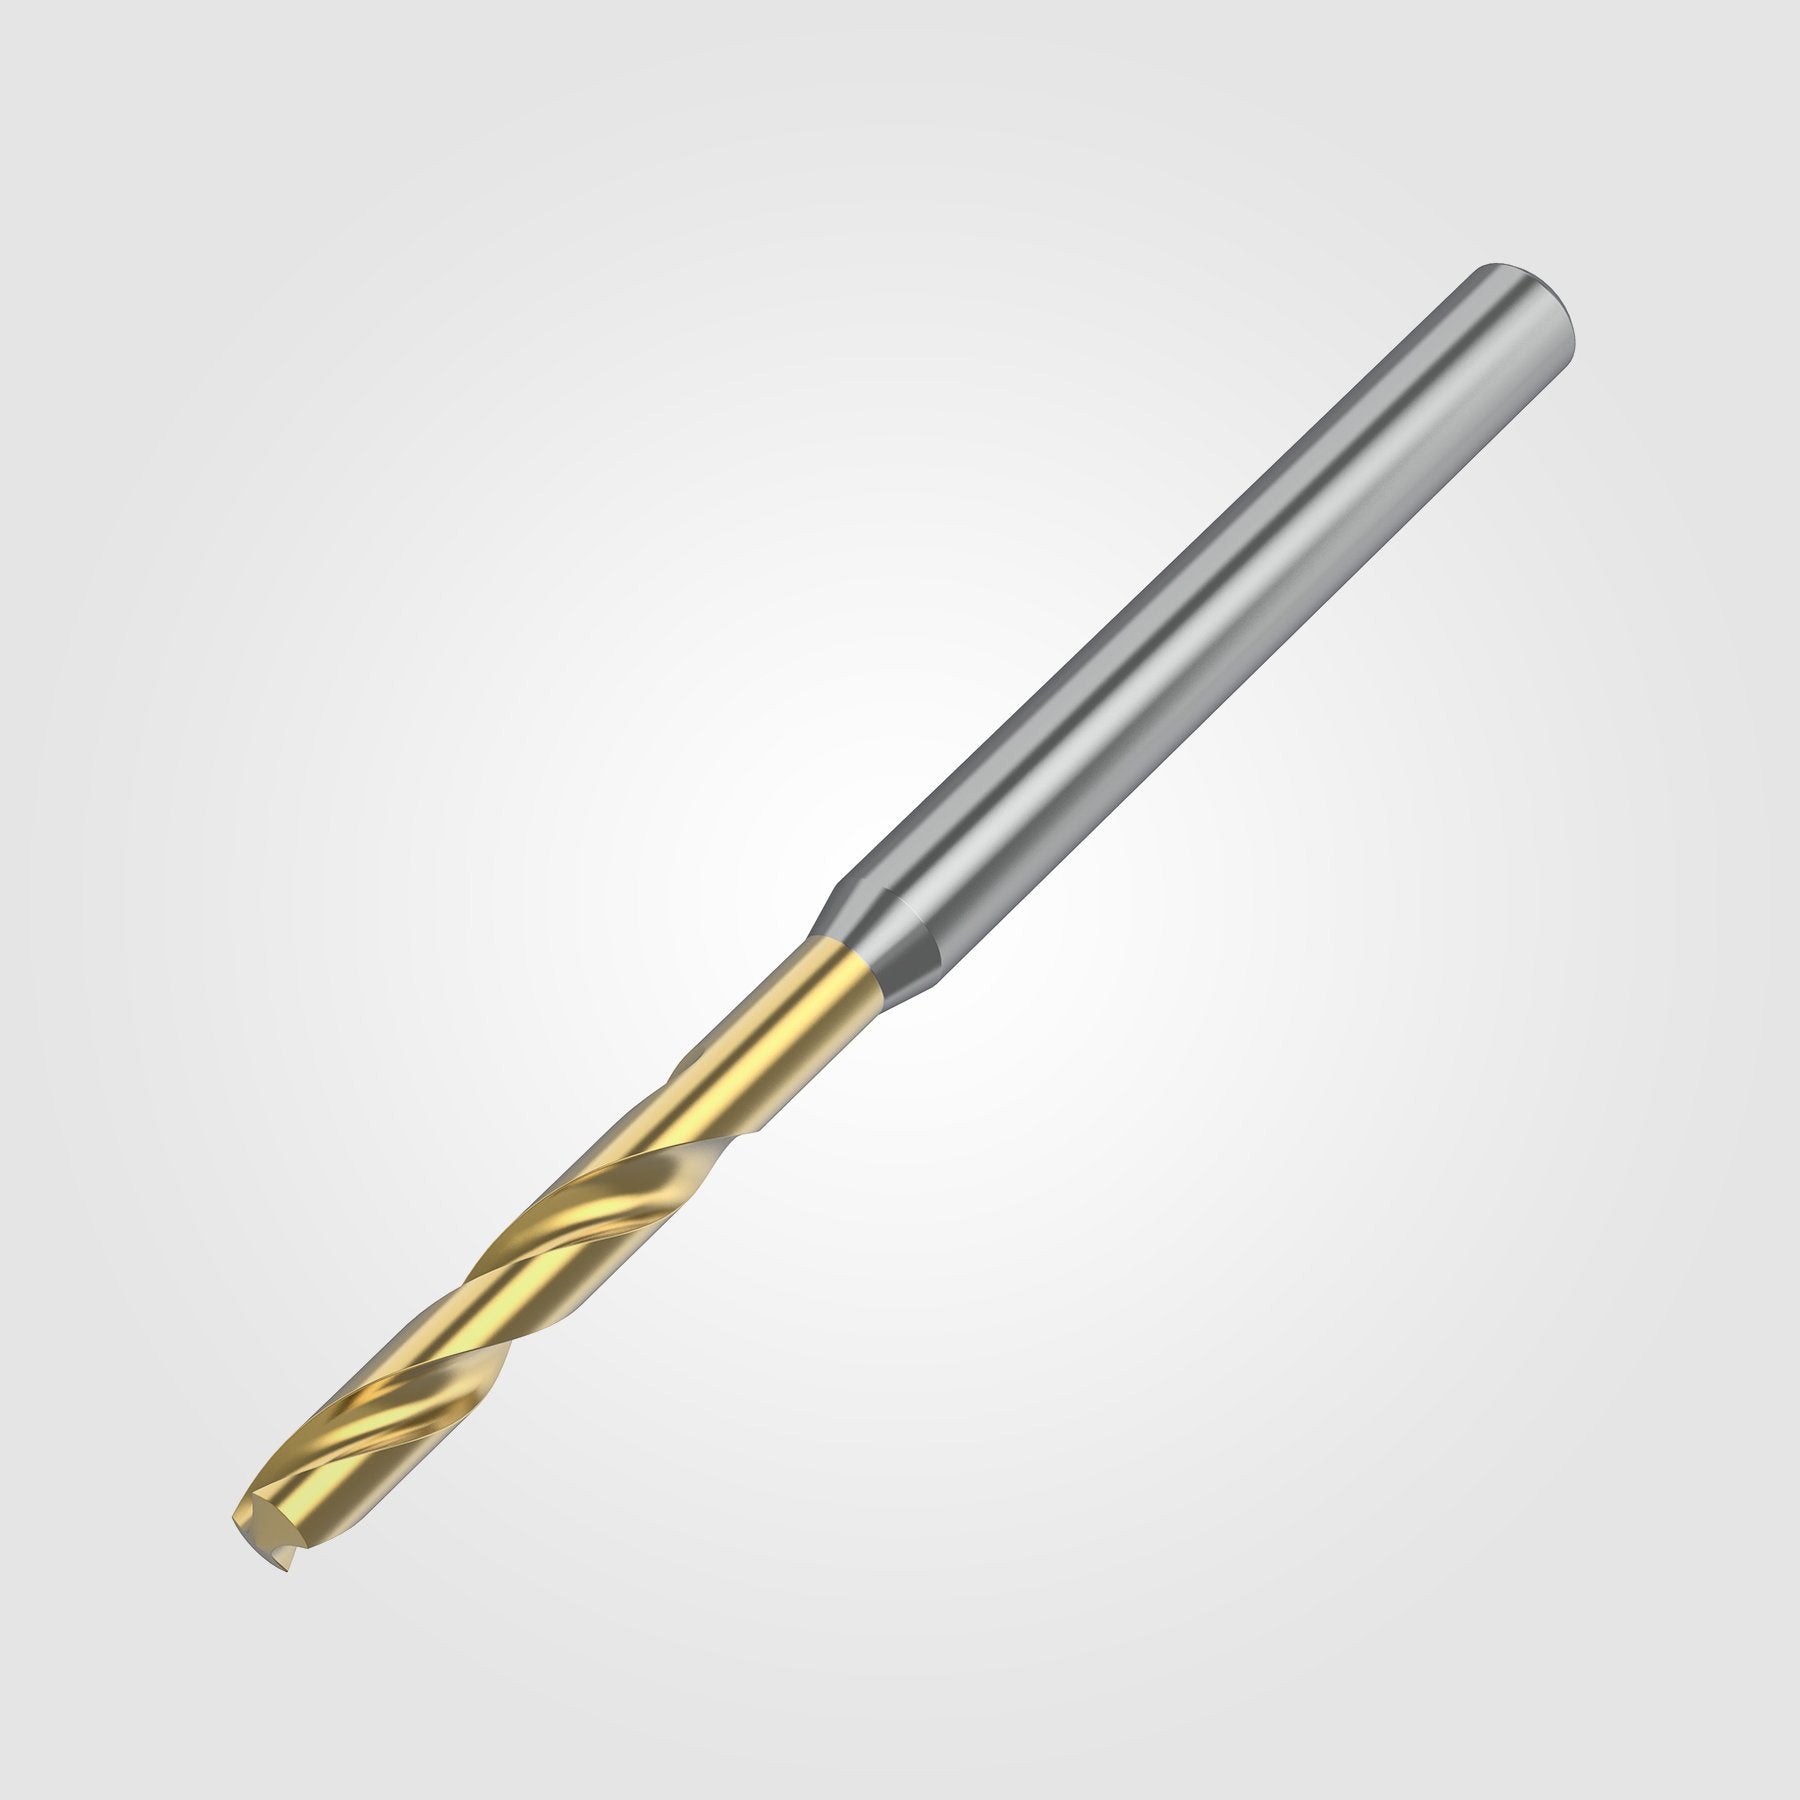 GOdrill (THROUGH COOLANT) | 6.5mm / .2559" / 3xD | SOLID CARBIDE DRILL | 4151154